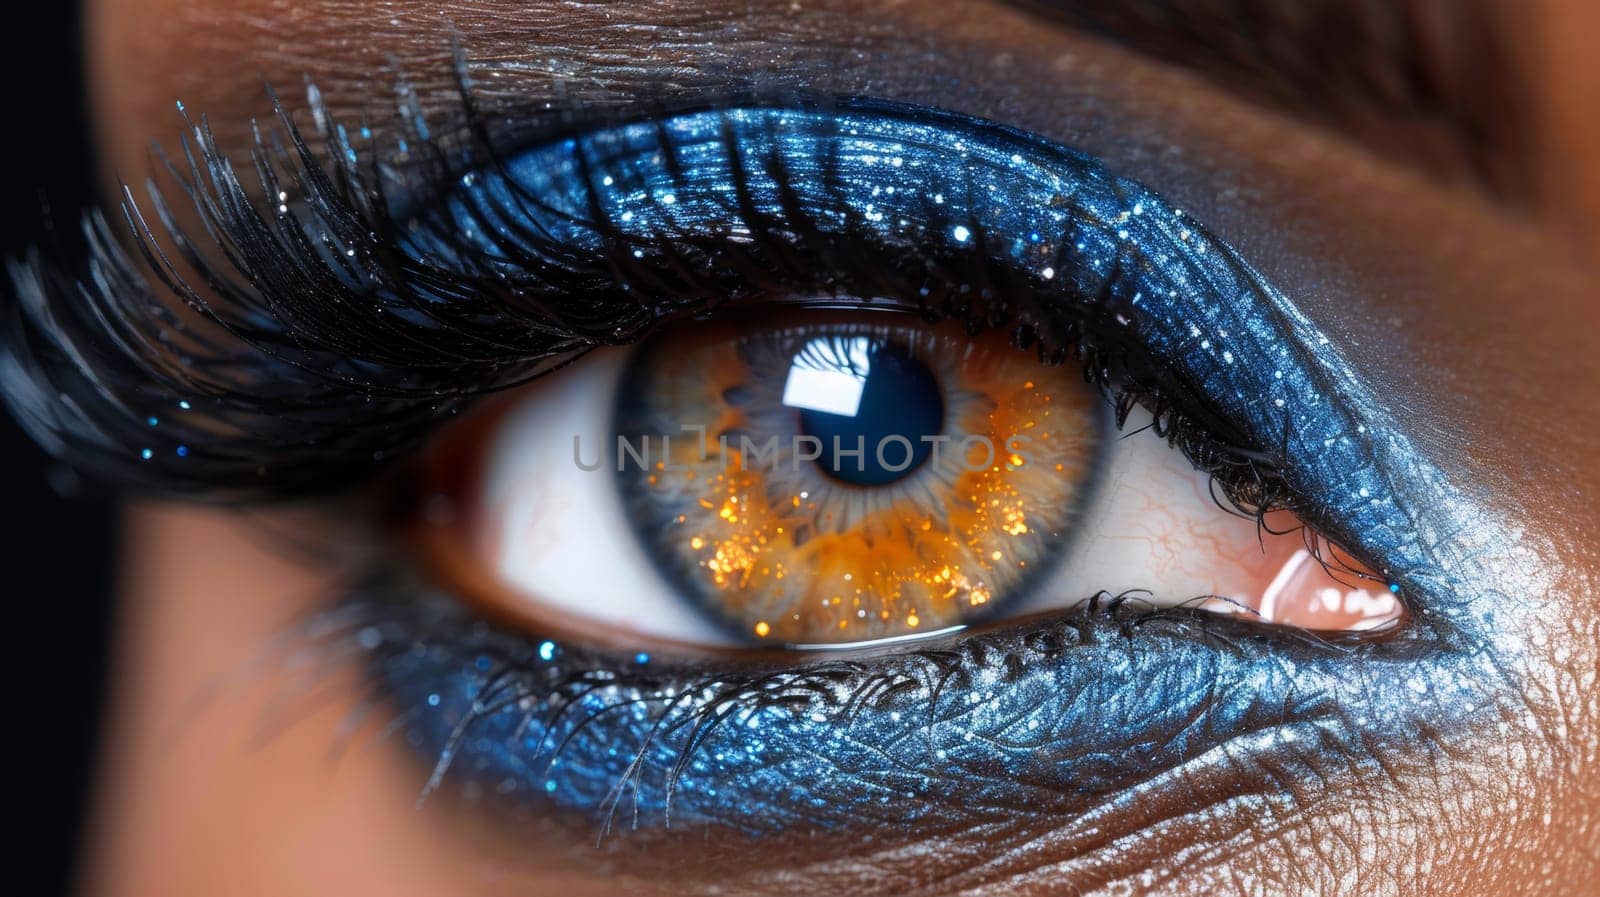 A close up of a woman's eye with blue and orange makeup, AI by starush